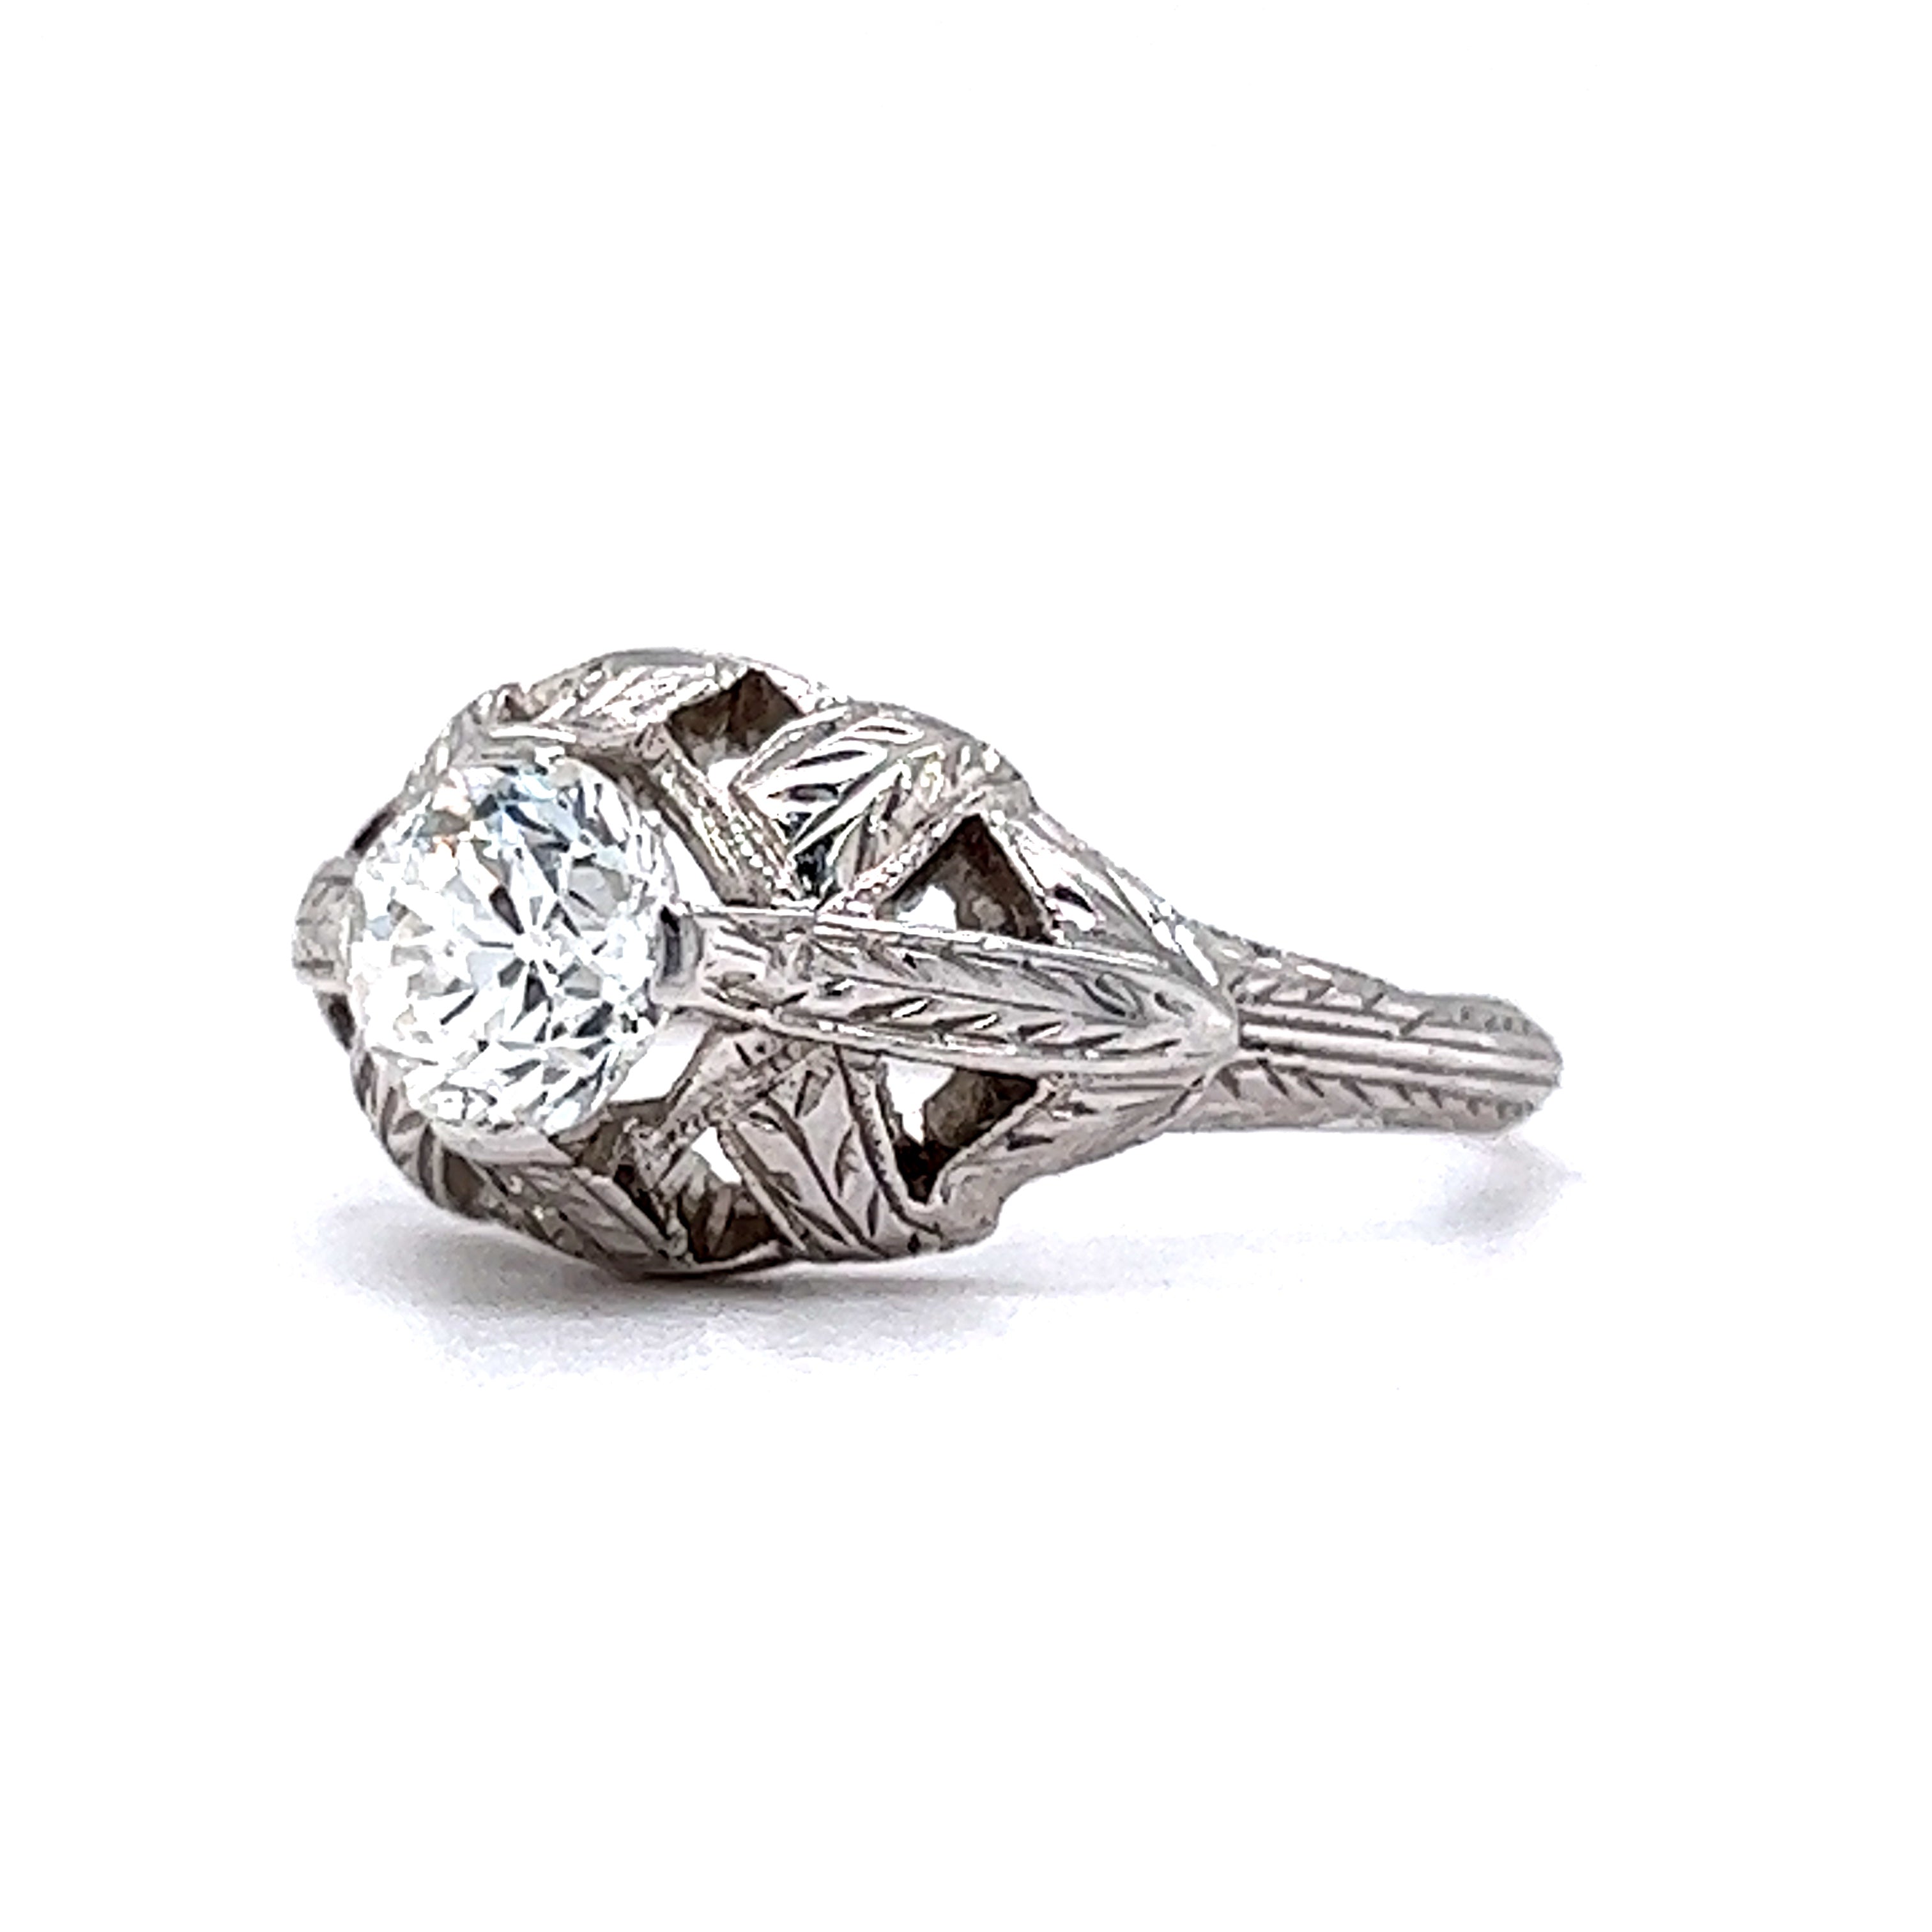 Discover 209+ vintage engraved engagement rings best